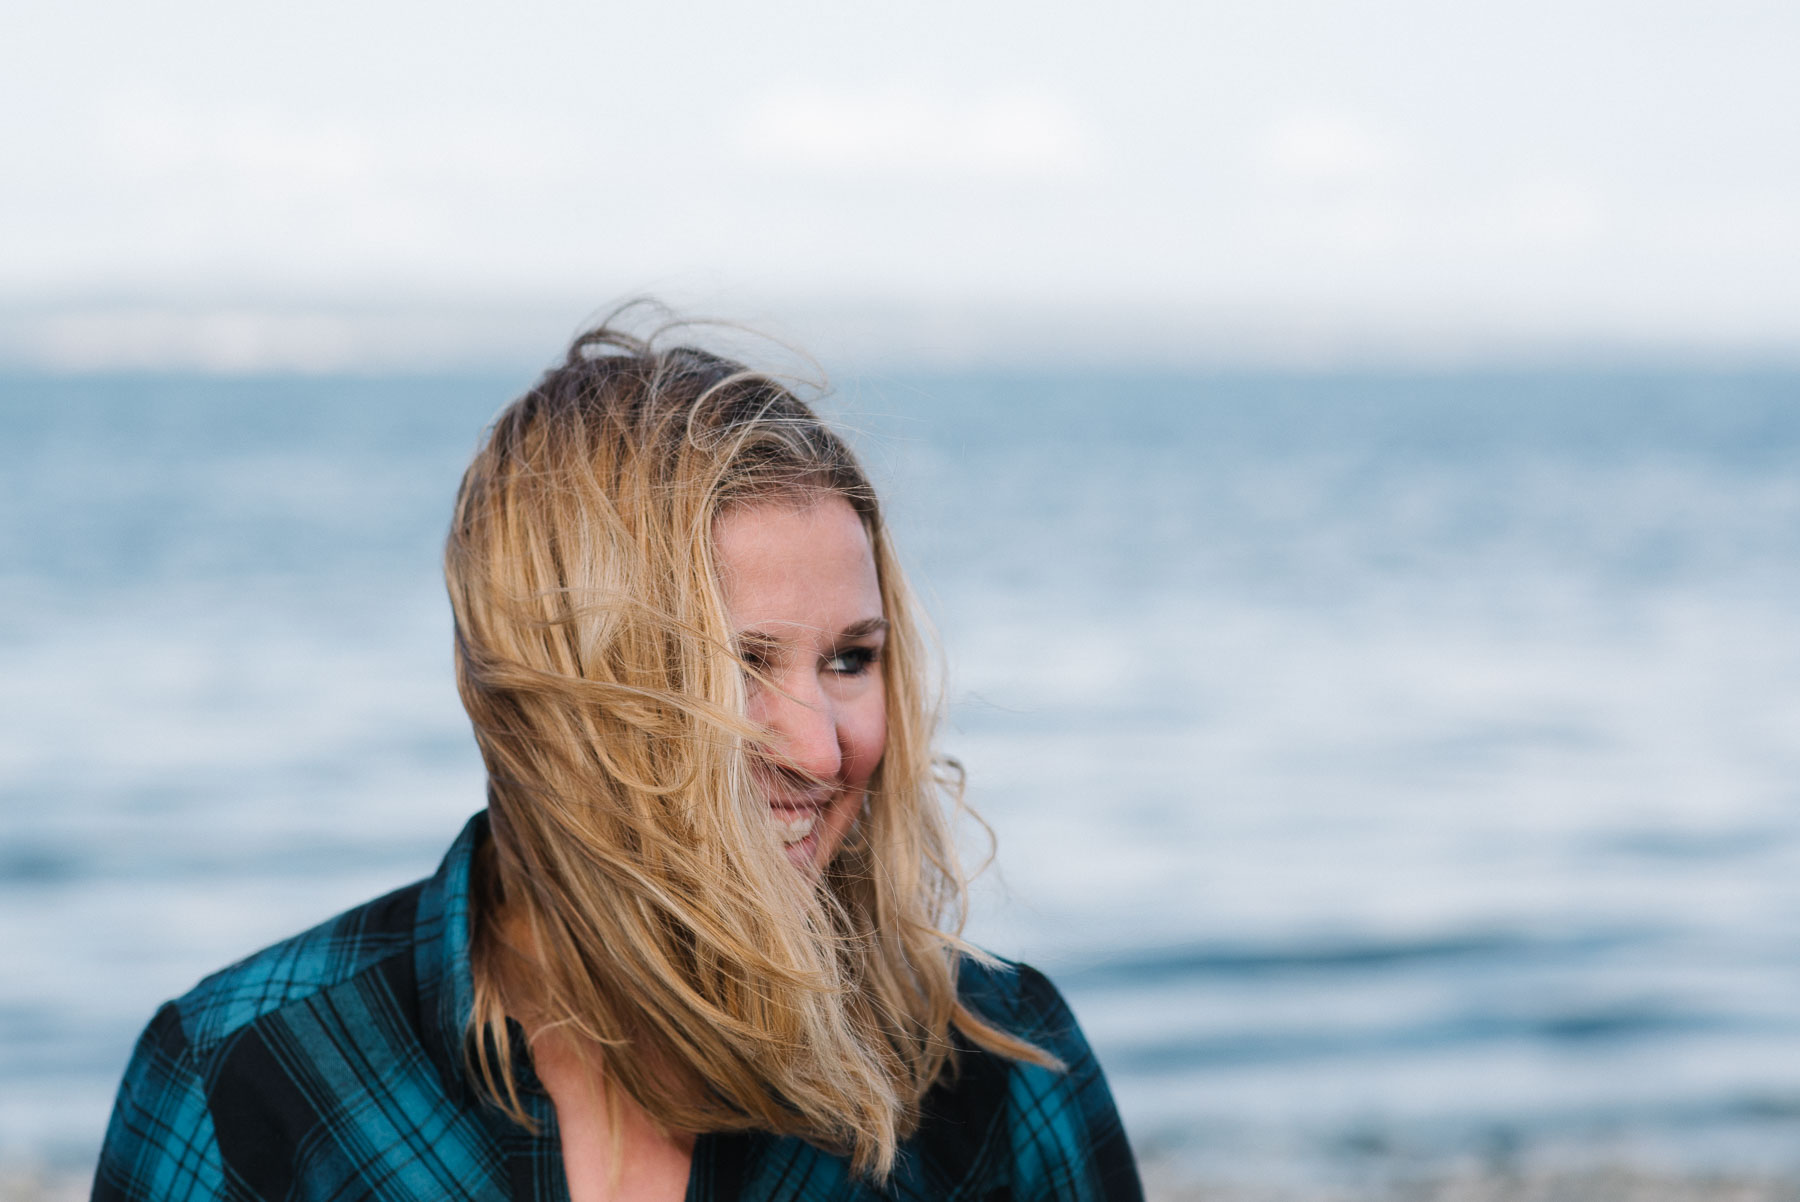 Portrait of caucasian woman with long blonde hair blowing in face at beach